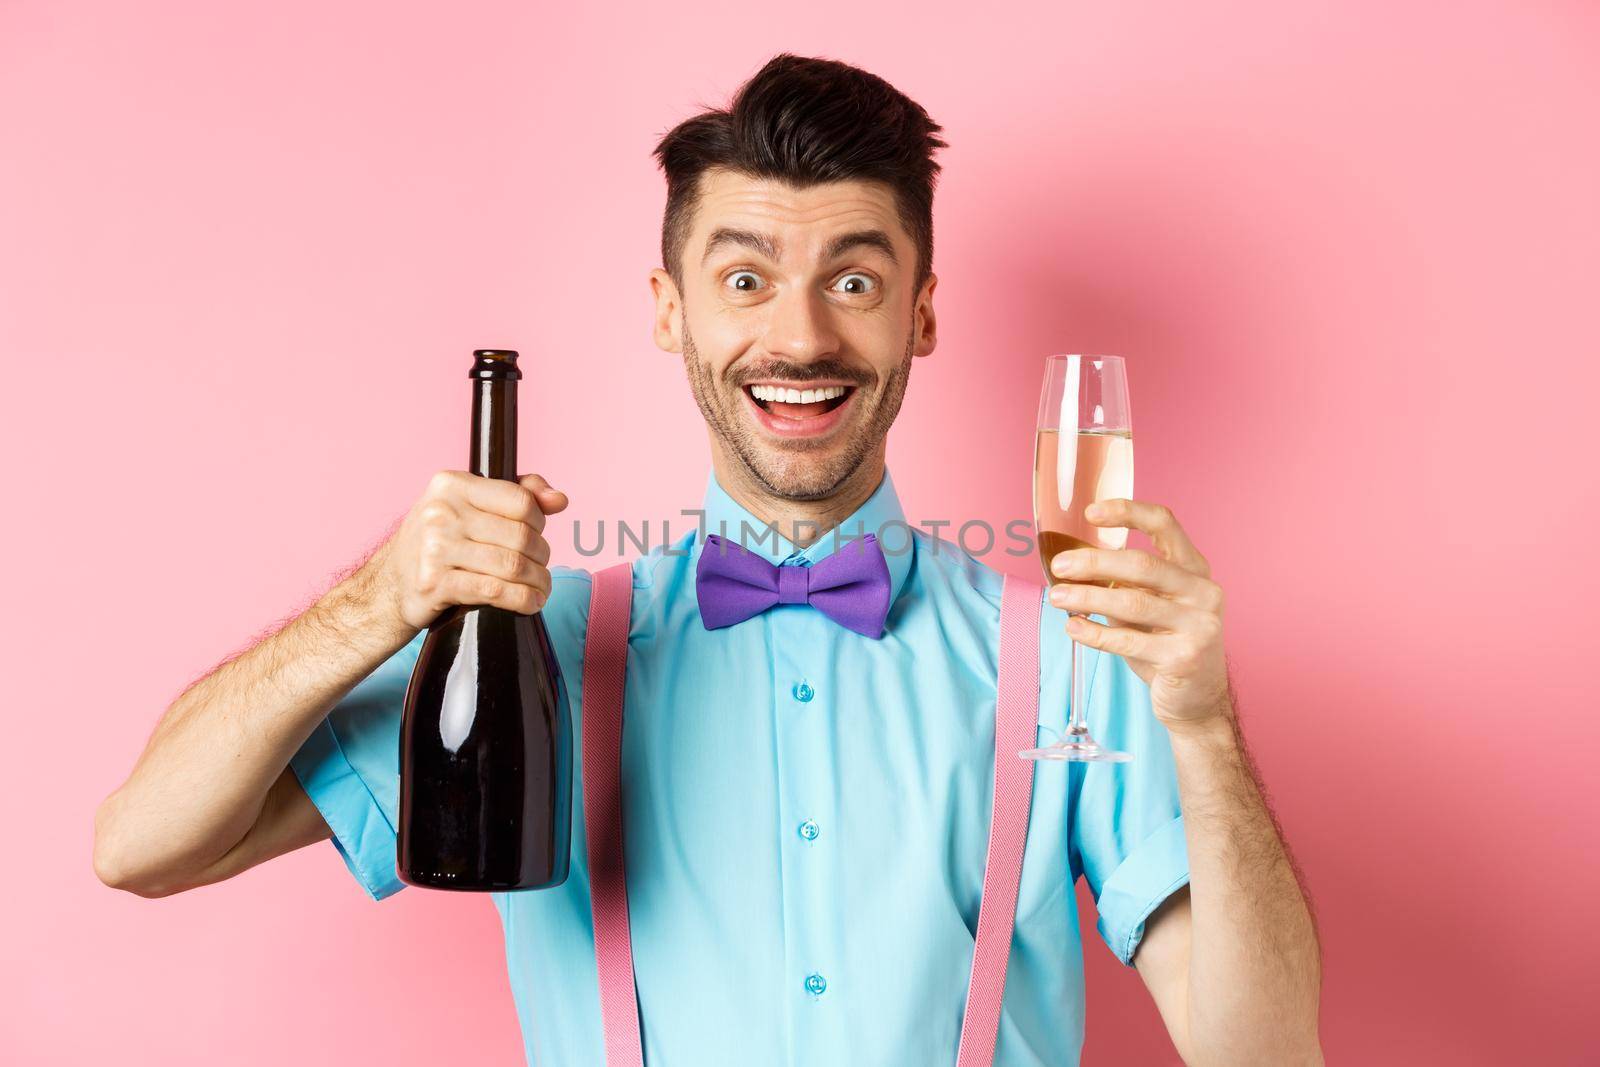 Holidays and celebration concept. Happy young man having fun, showing bottle of champagne and glass, making toast on event, smiling and looking at camera, pink background.